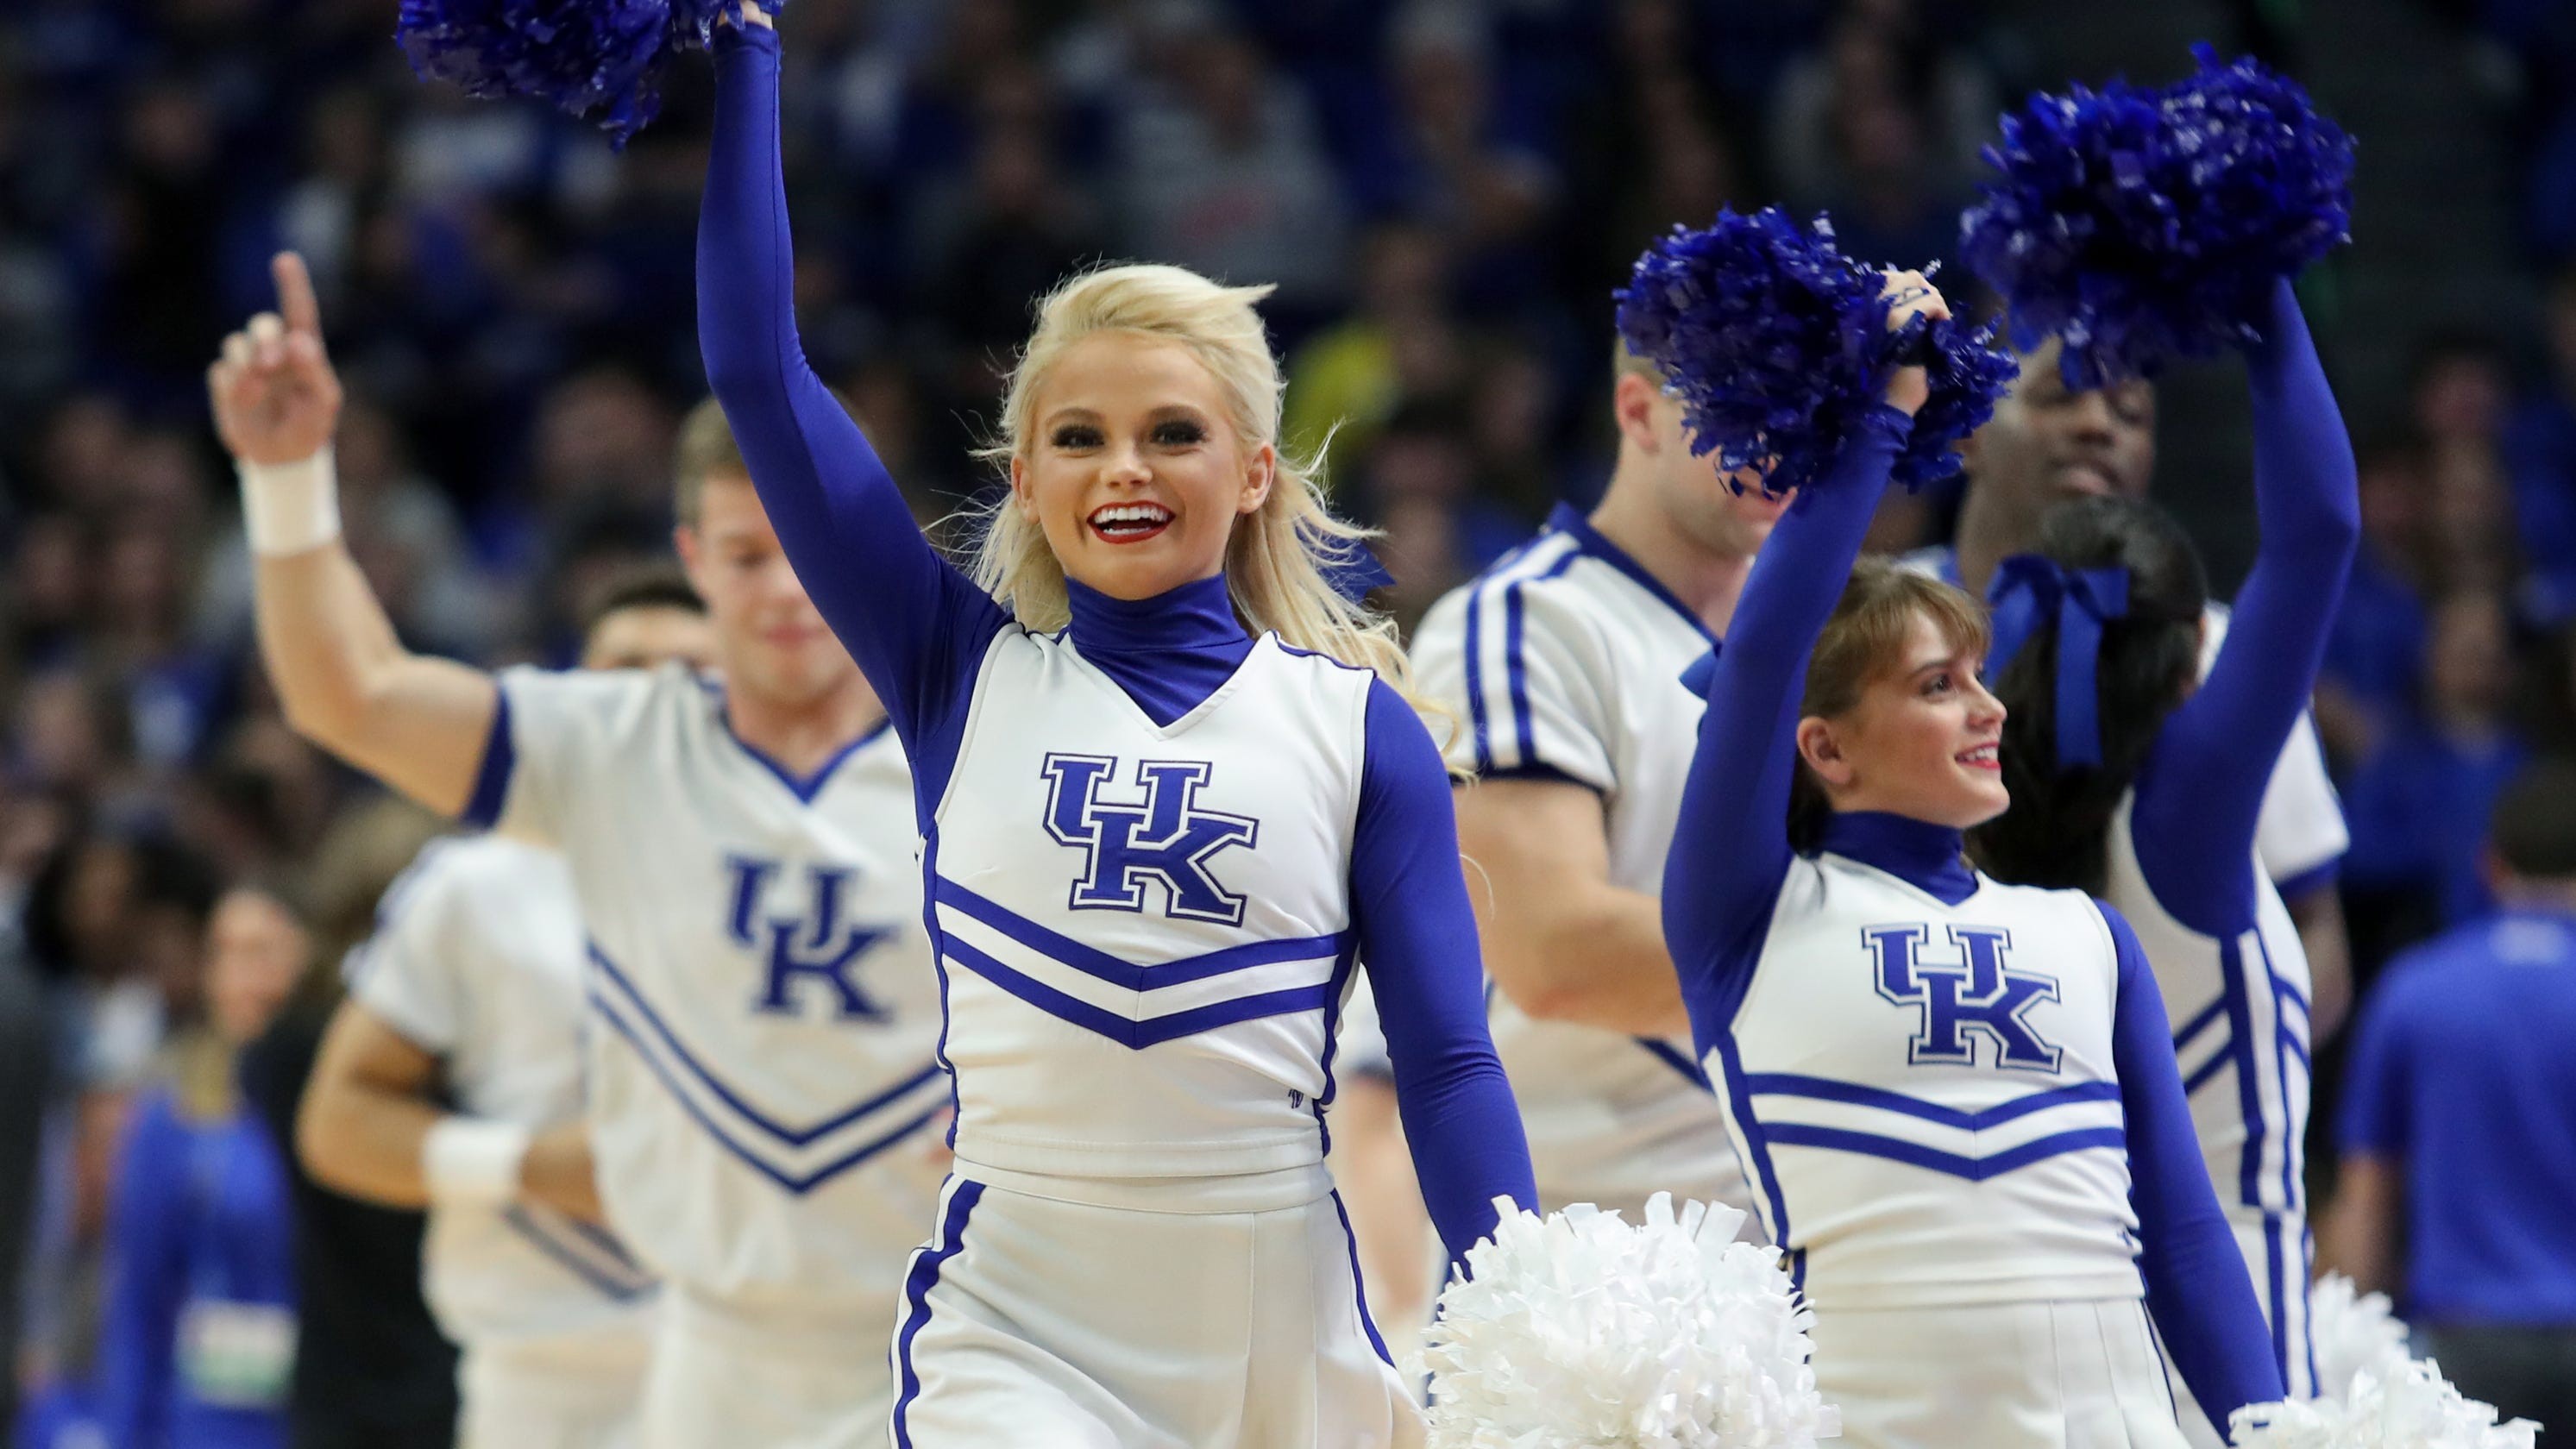 Kentucky's cheerleading scandals shows that grownups didn't act the part